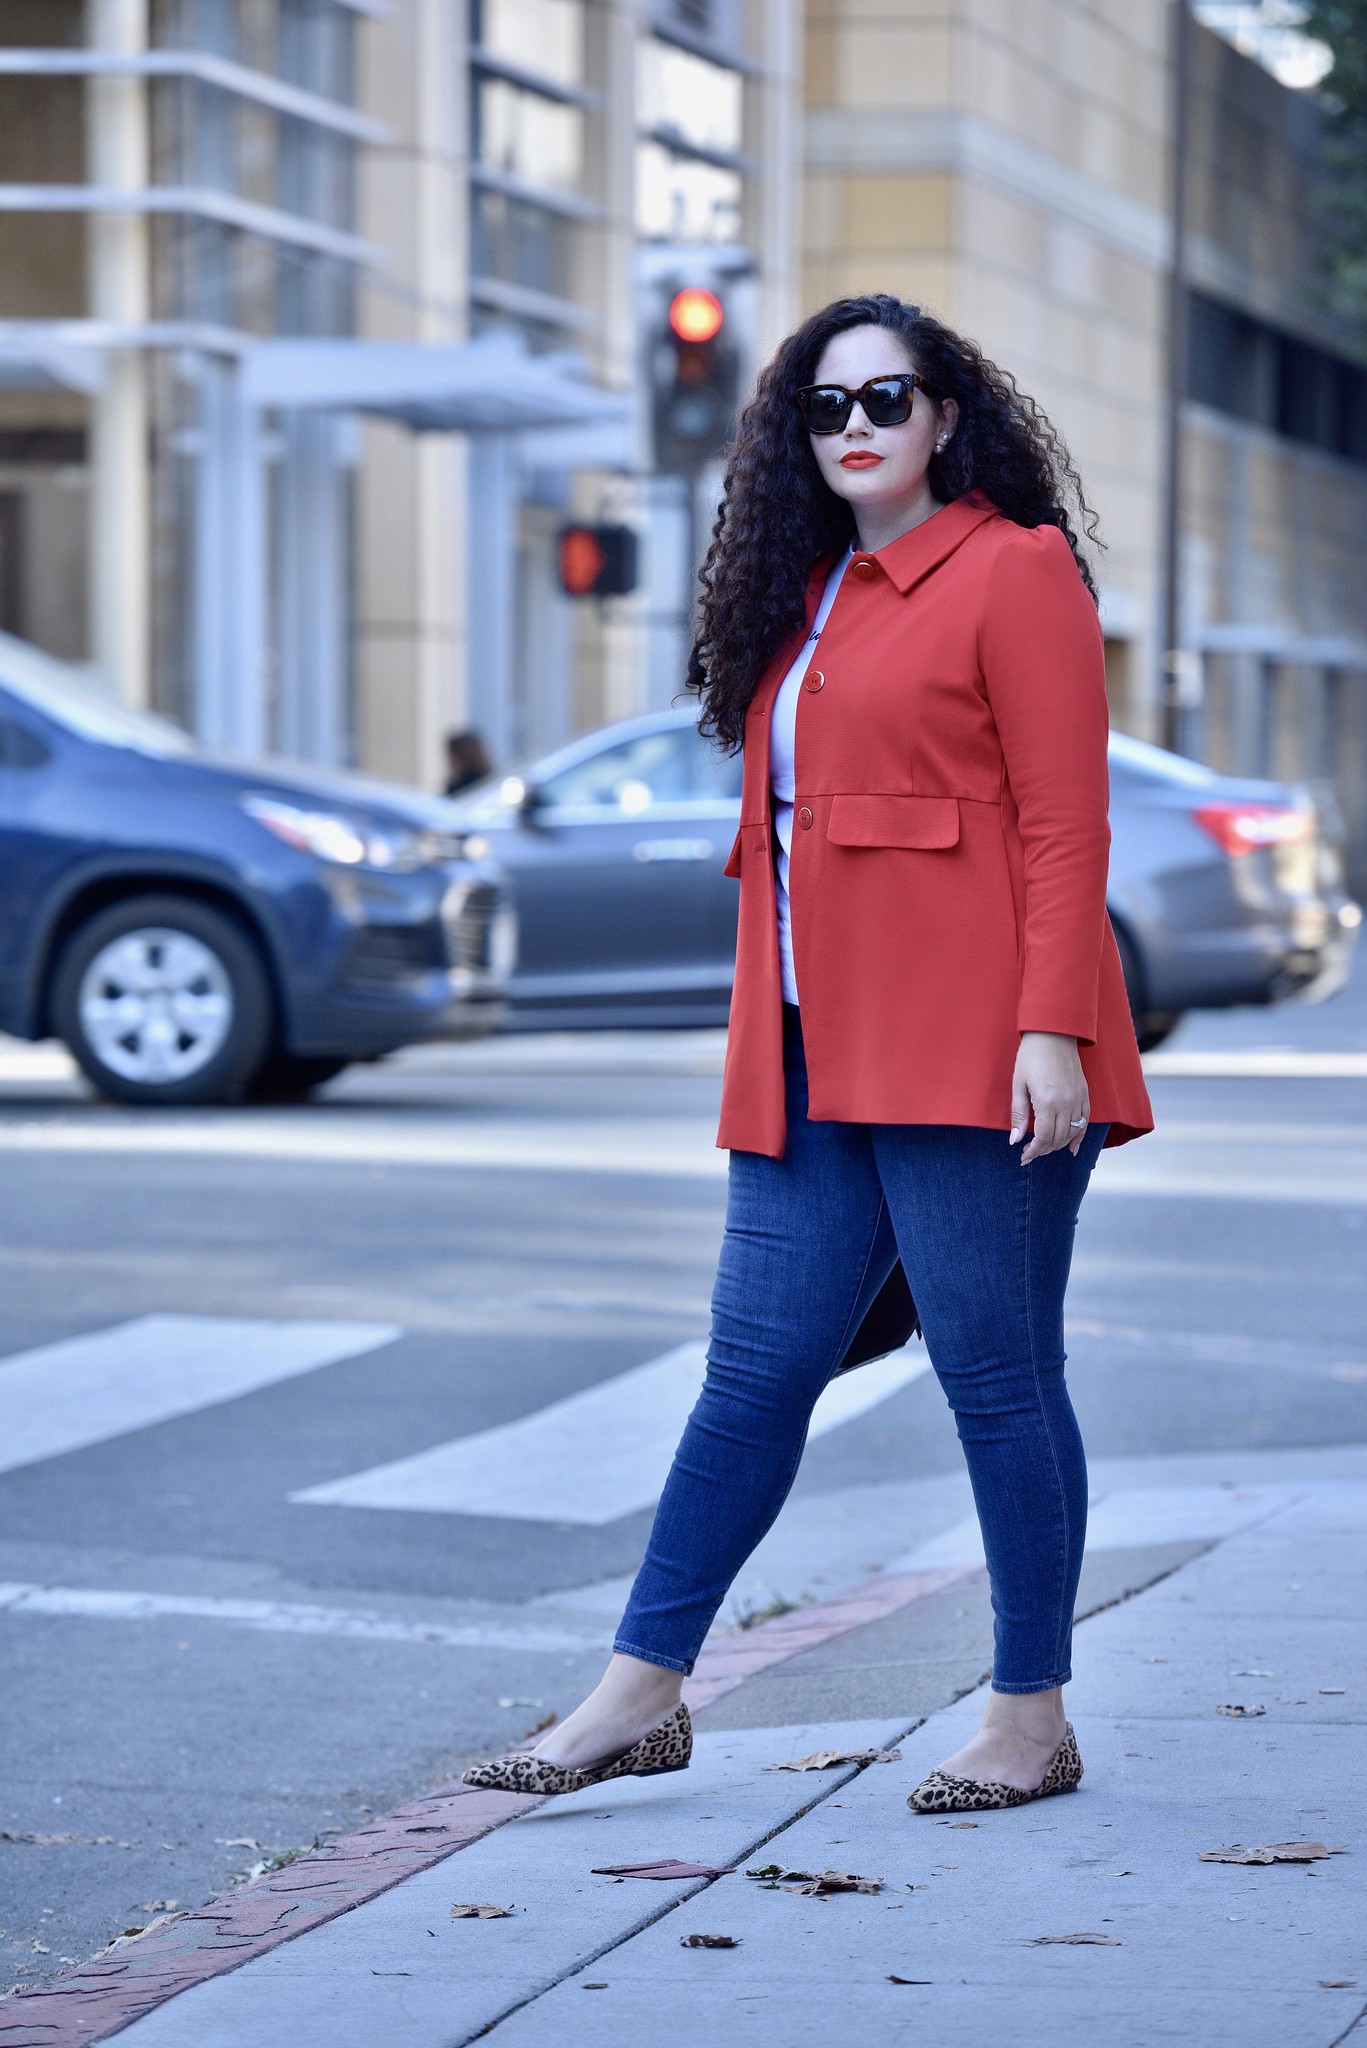 An Easy Outfit Formula that Never goes out of Style via Girl With Curves #style #plussize #curvy #fashion #red #jacket #coat